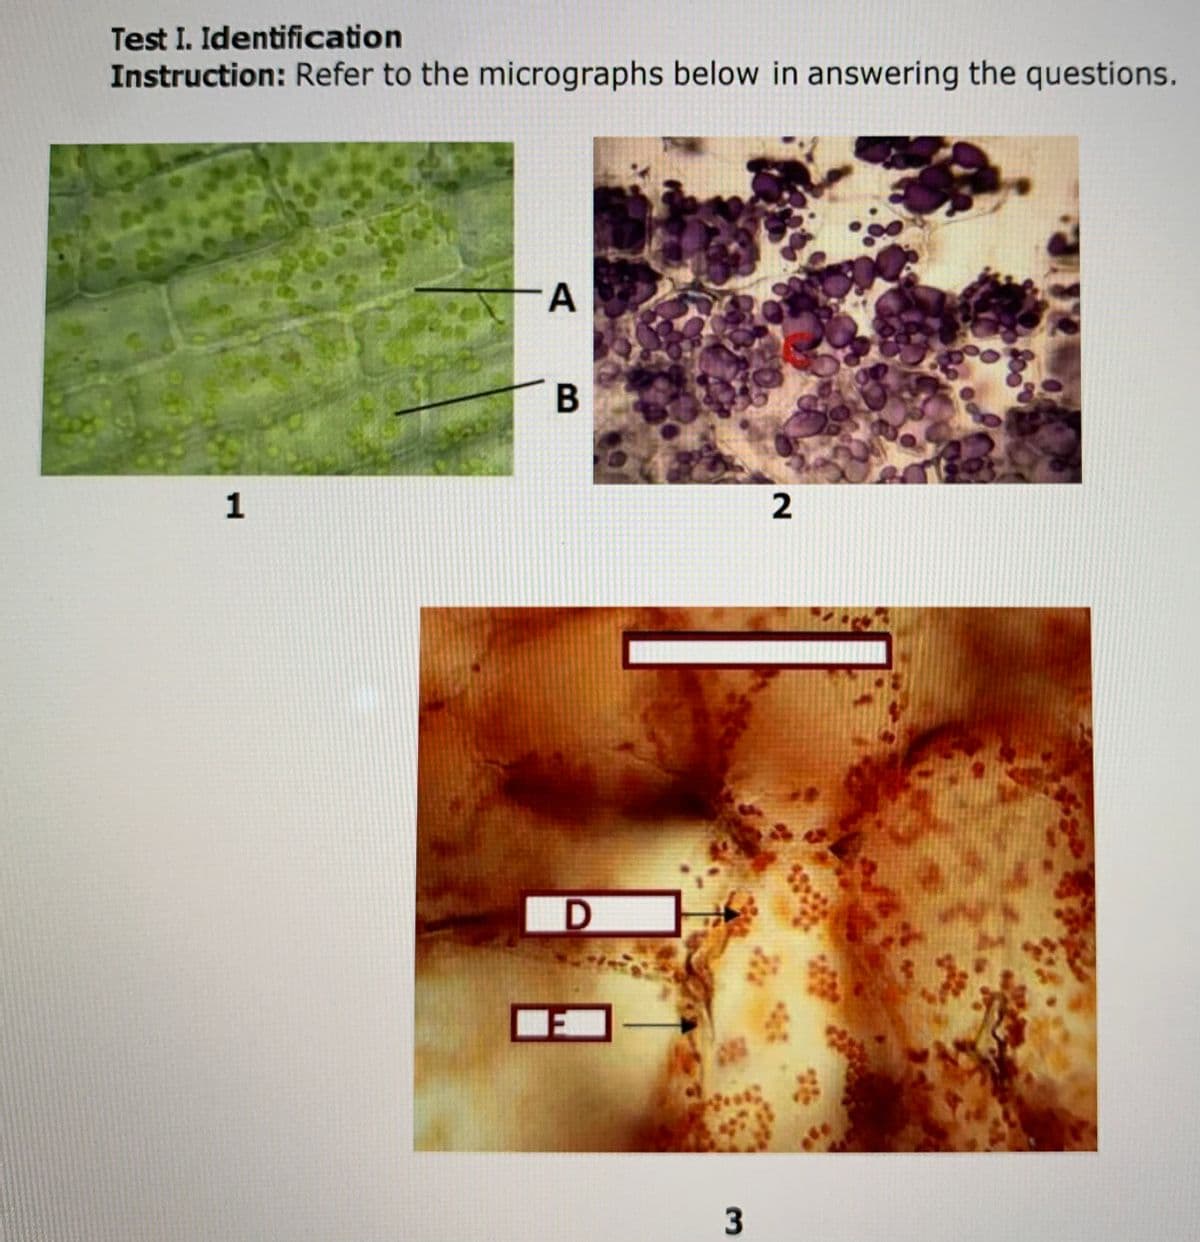 Test I. Identification
Instruction: Refer to the micrographs below in answering the questions.
EST
B
1
3.
